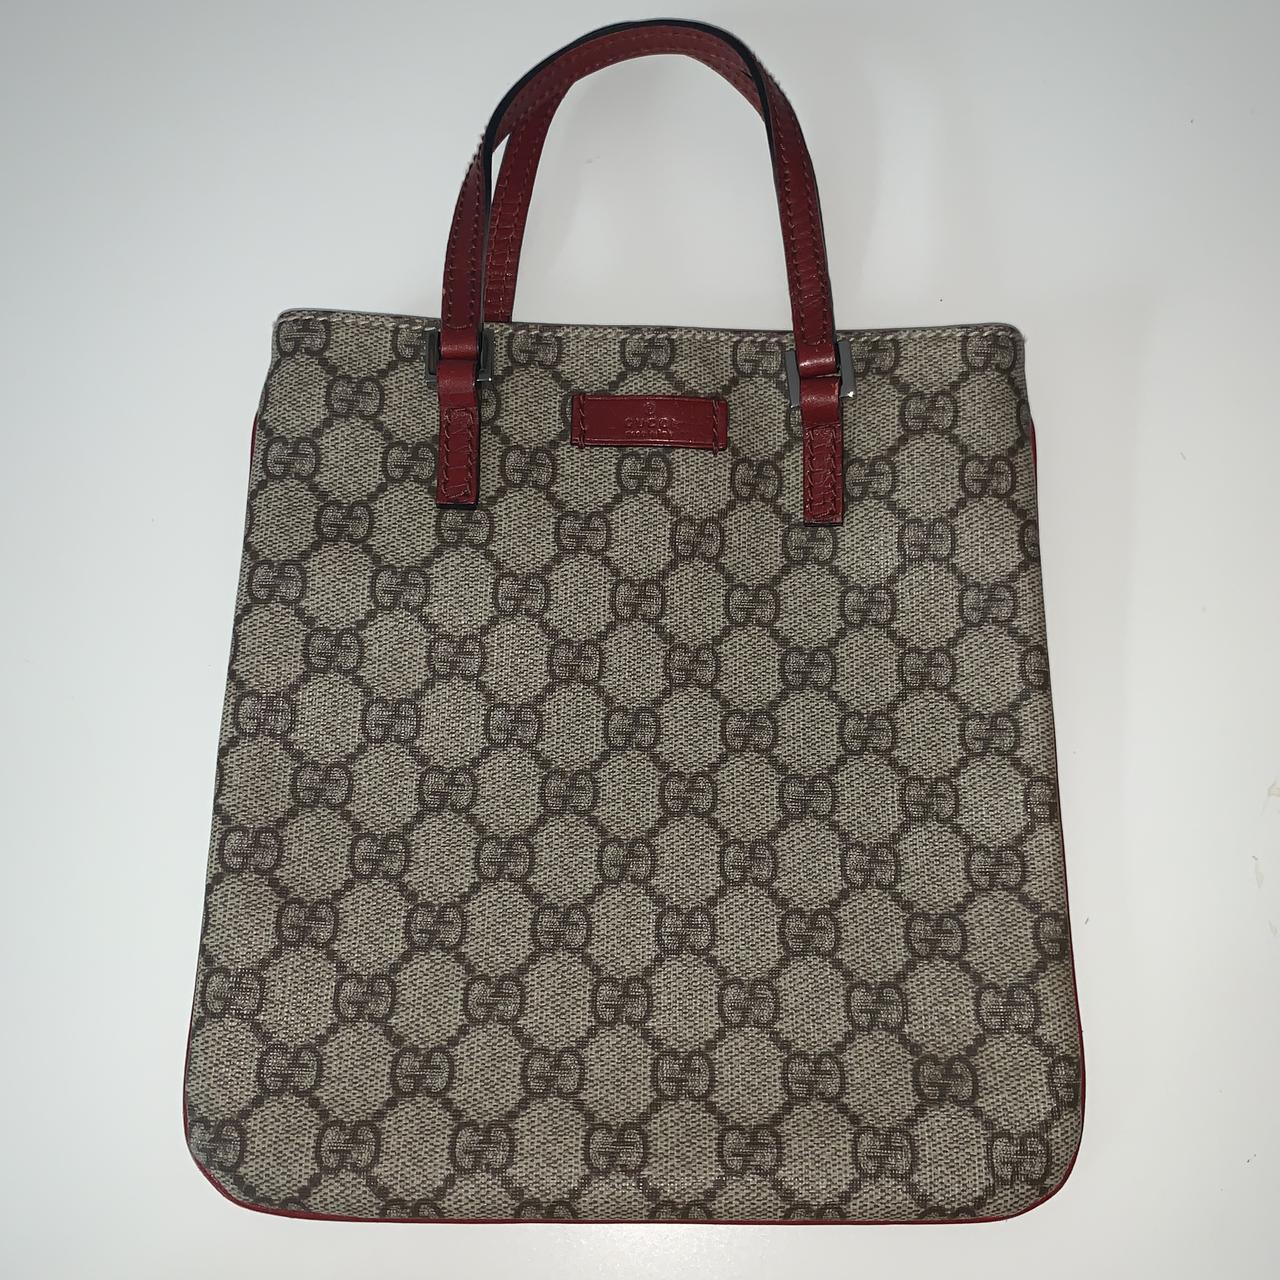 Gucci, Bags, Authentic Vintage Gucci Tote